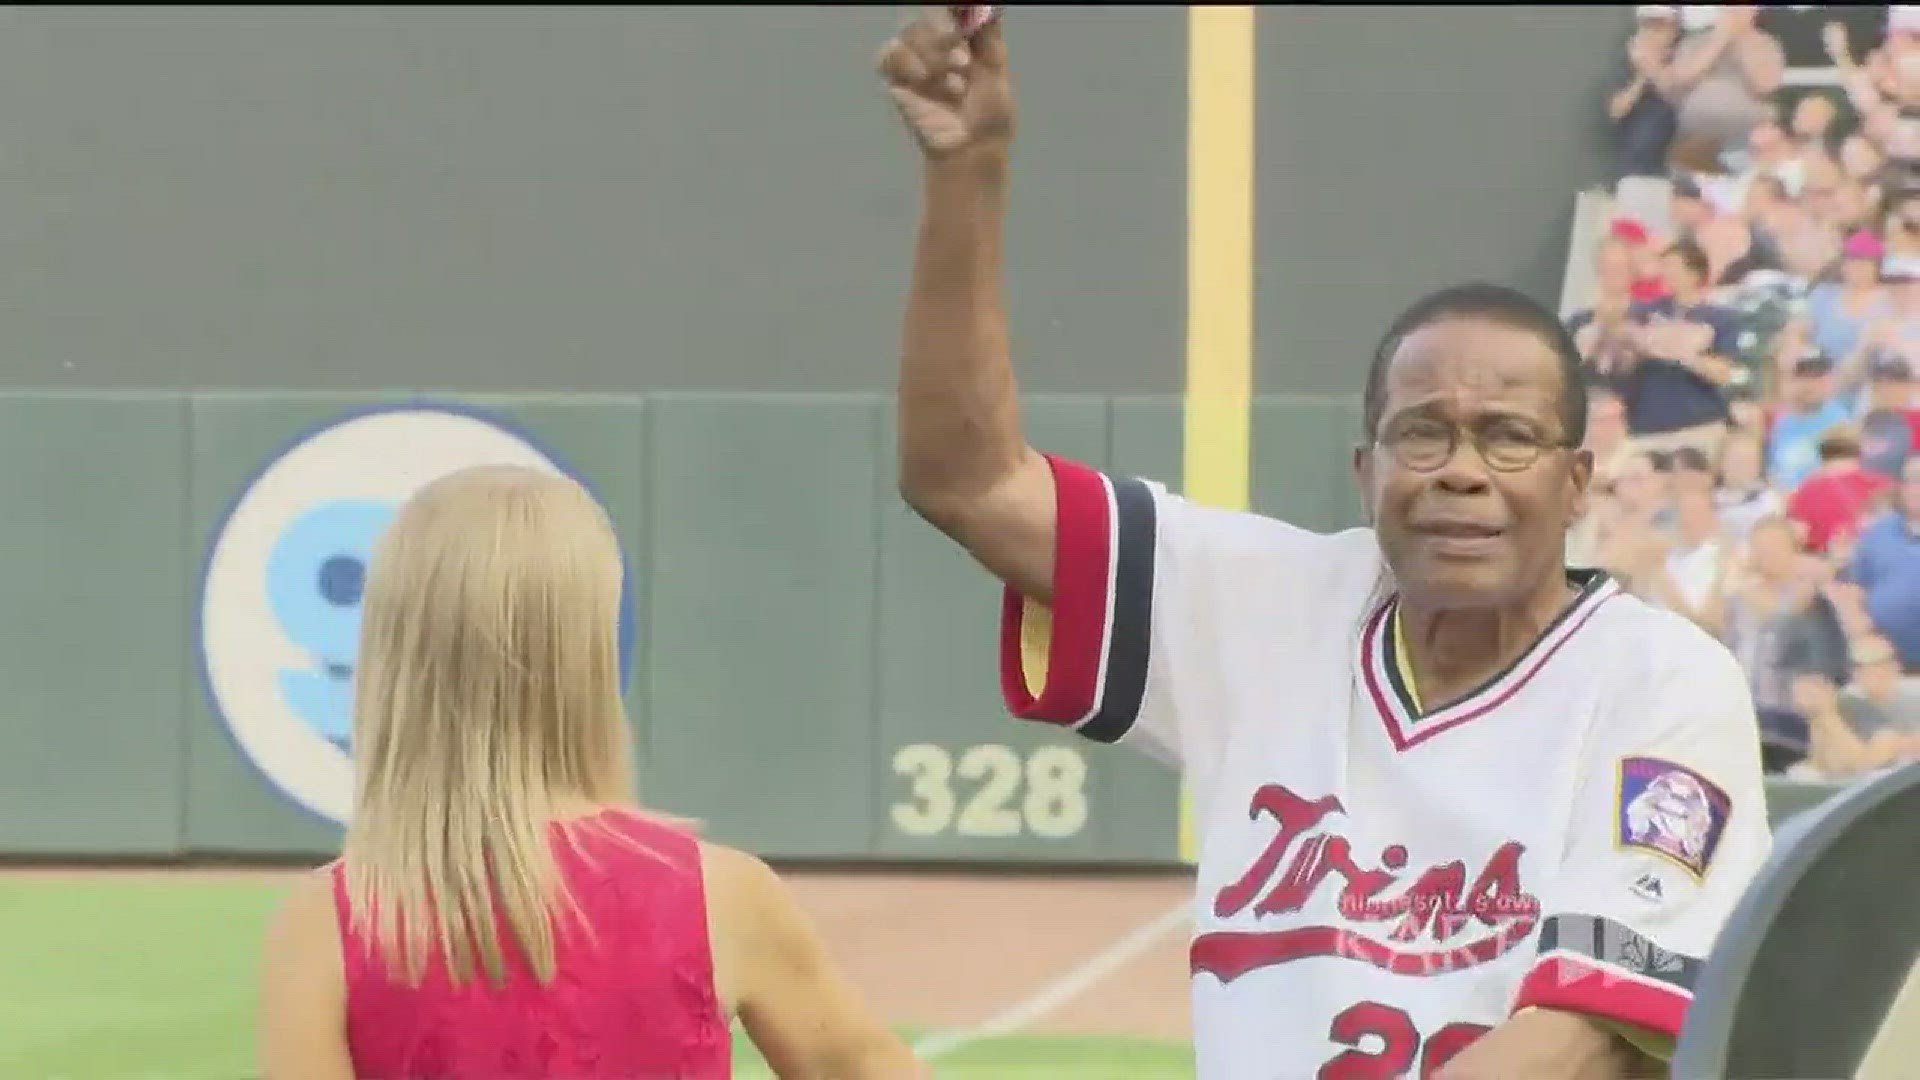 Rod Carew returns to MN after heart transplant